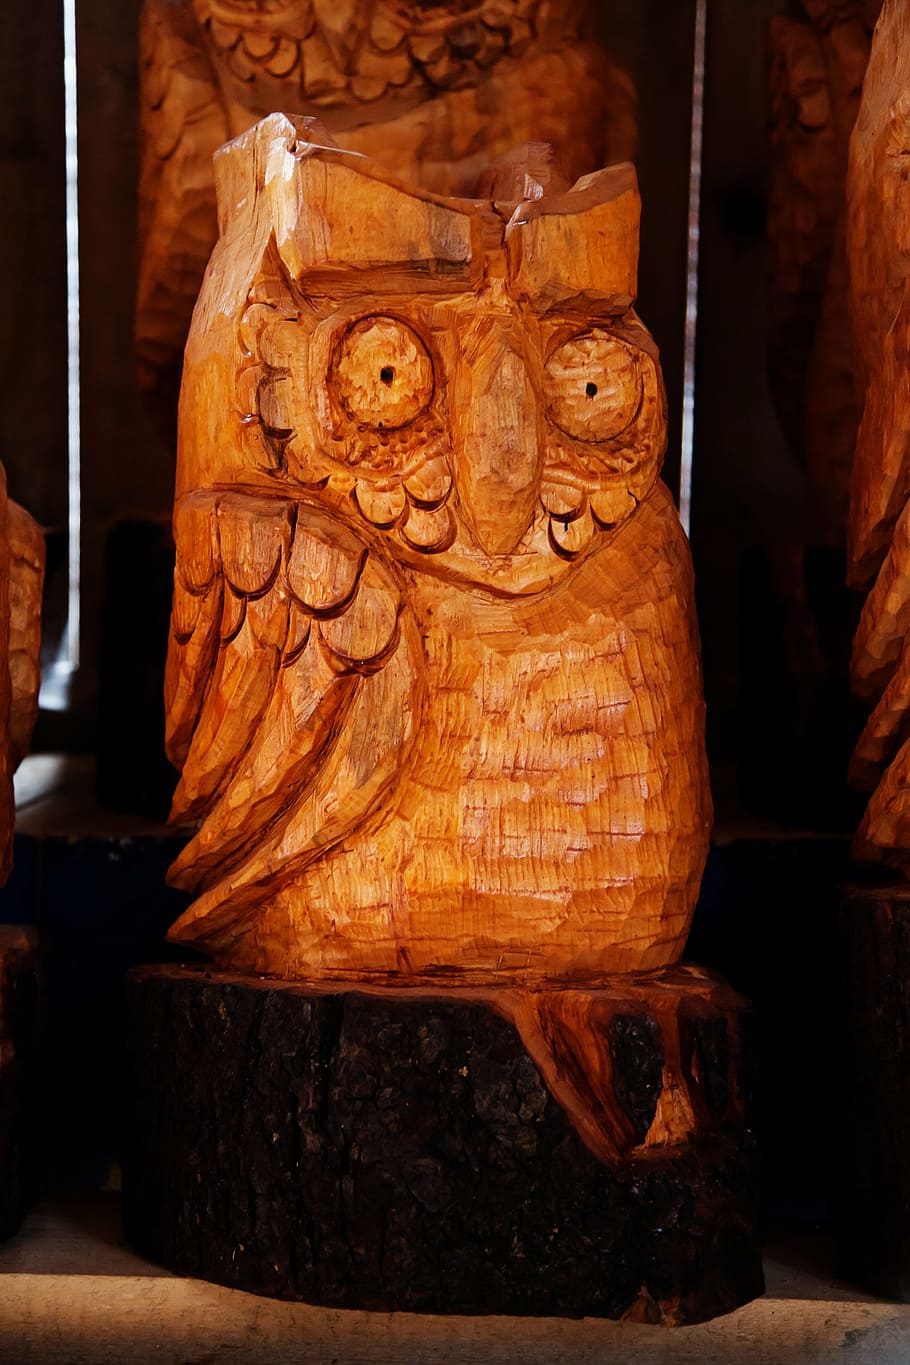 animal, art, bird, brown, carved, carving, decoration, eyes, figurine, object